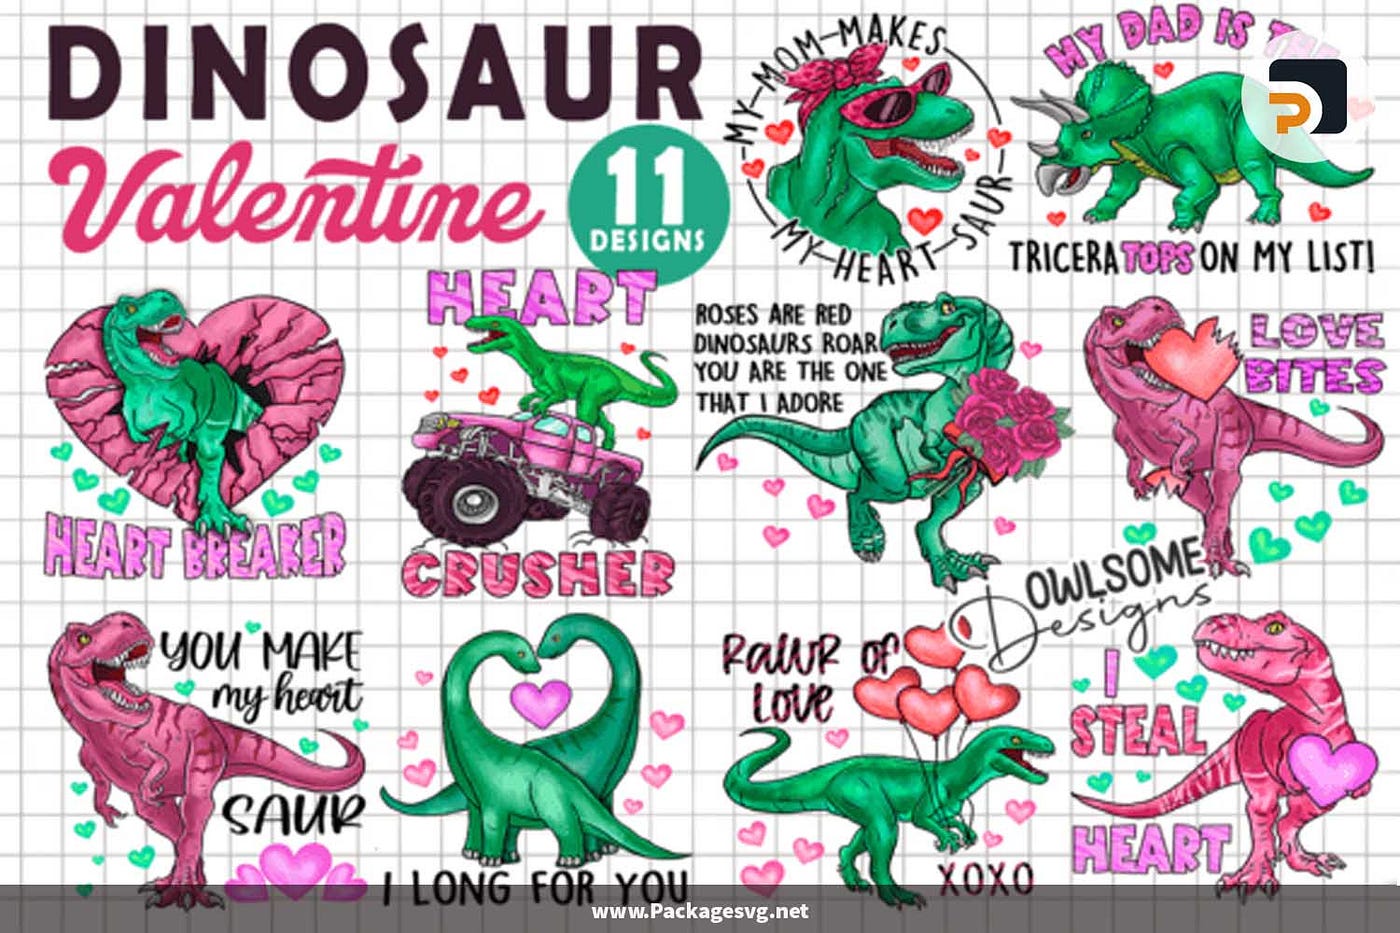 Dinosaur PNGs for Free Download